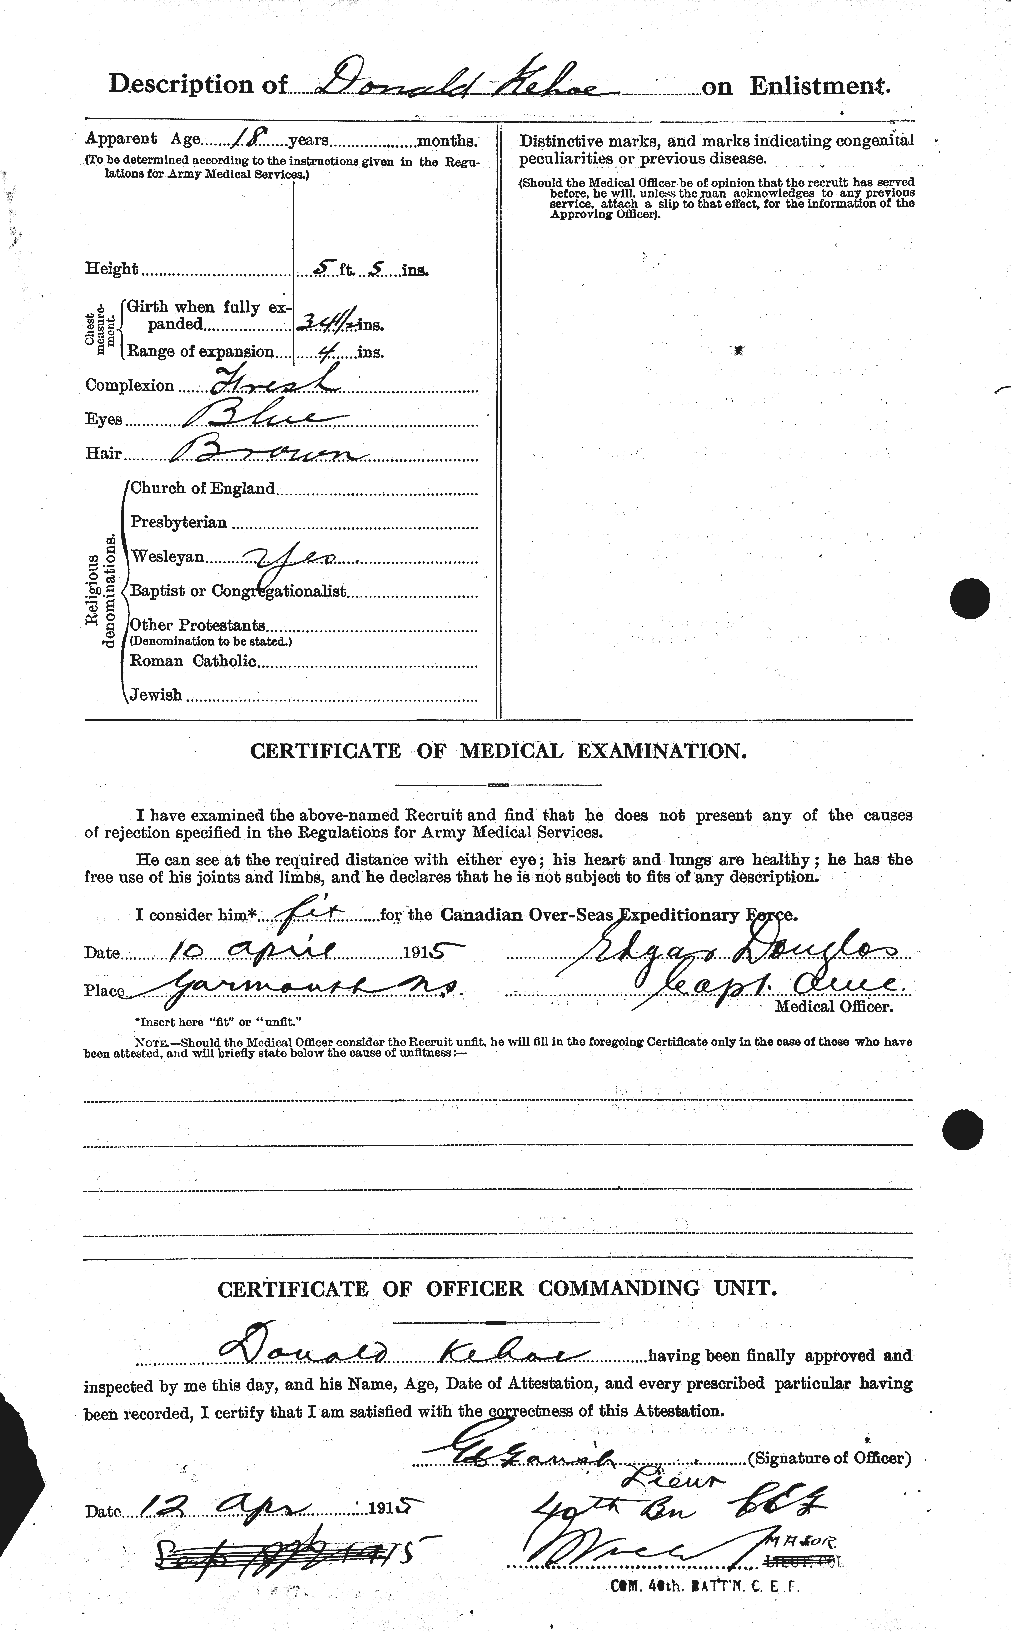 Personnel Records of the First World War - CEF 430367b